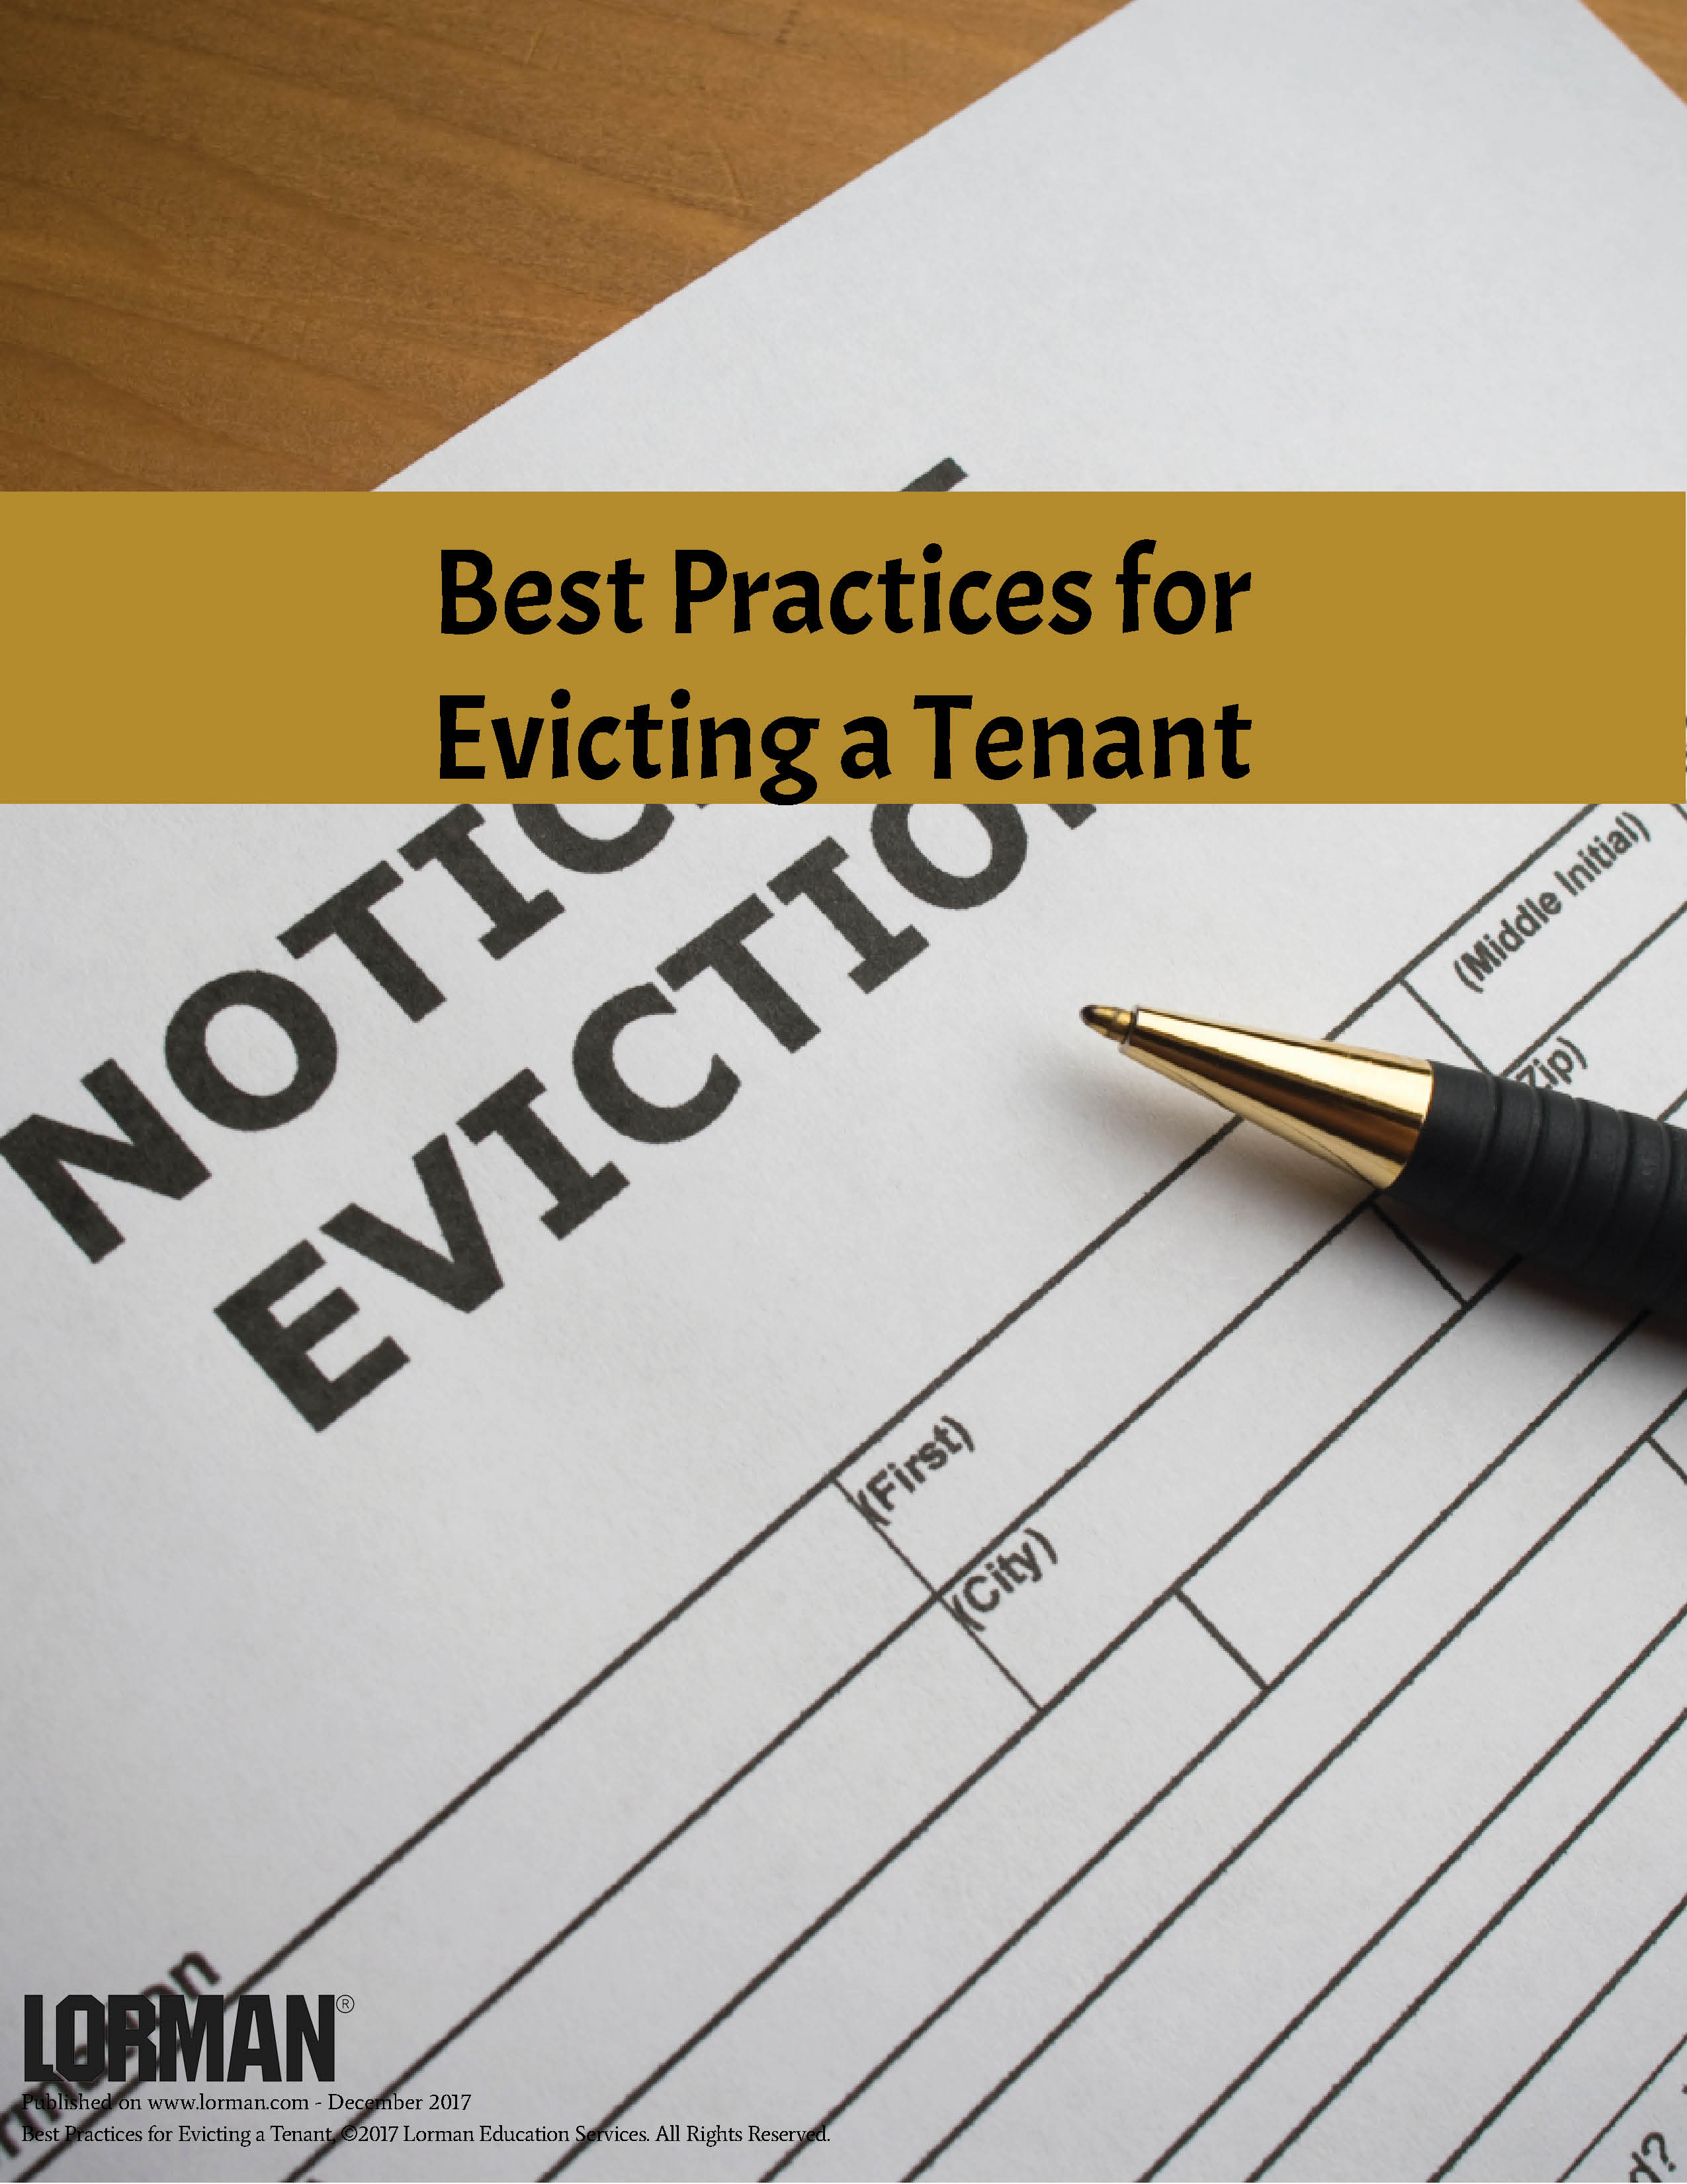 Best Practices for Evicting a Tenant